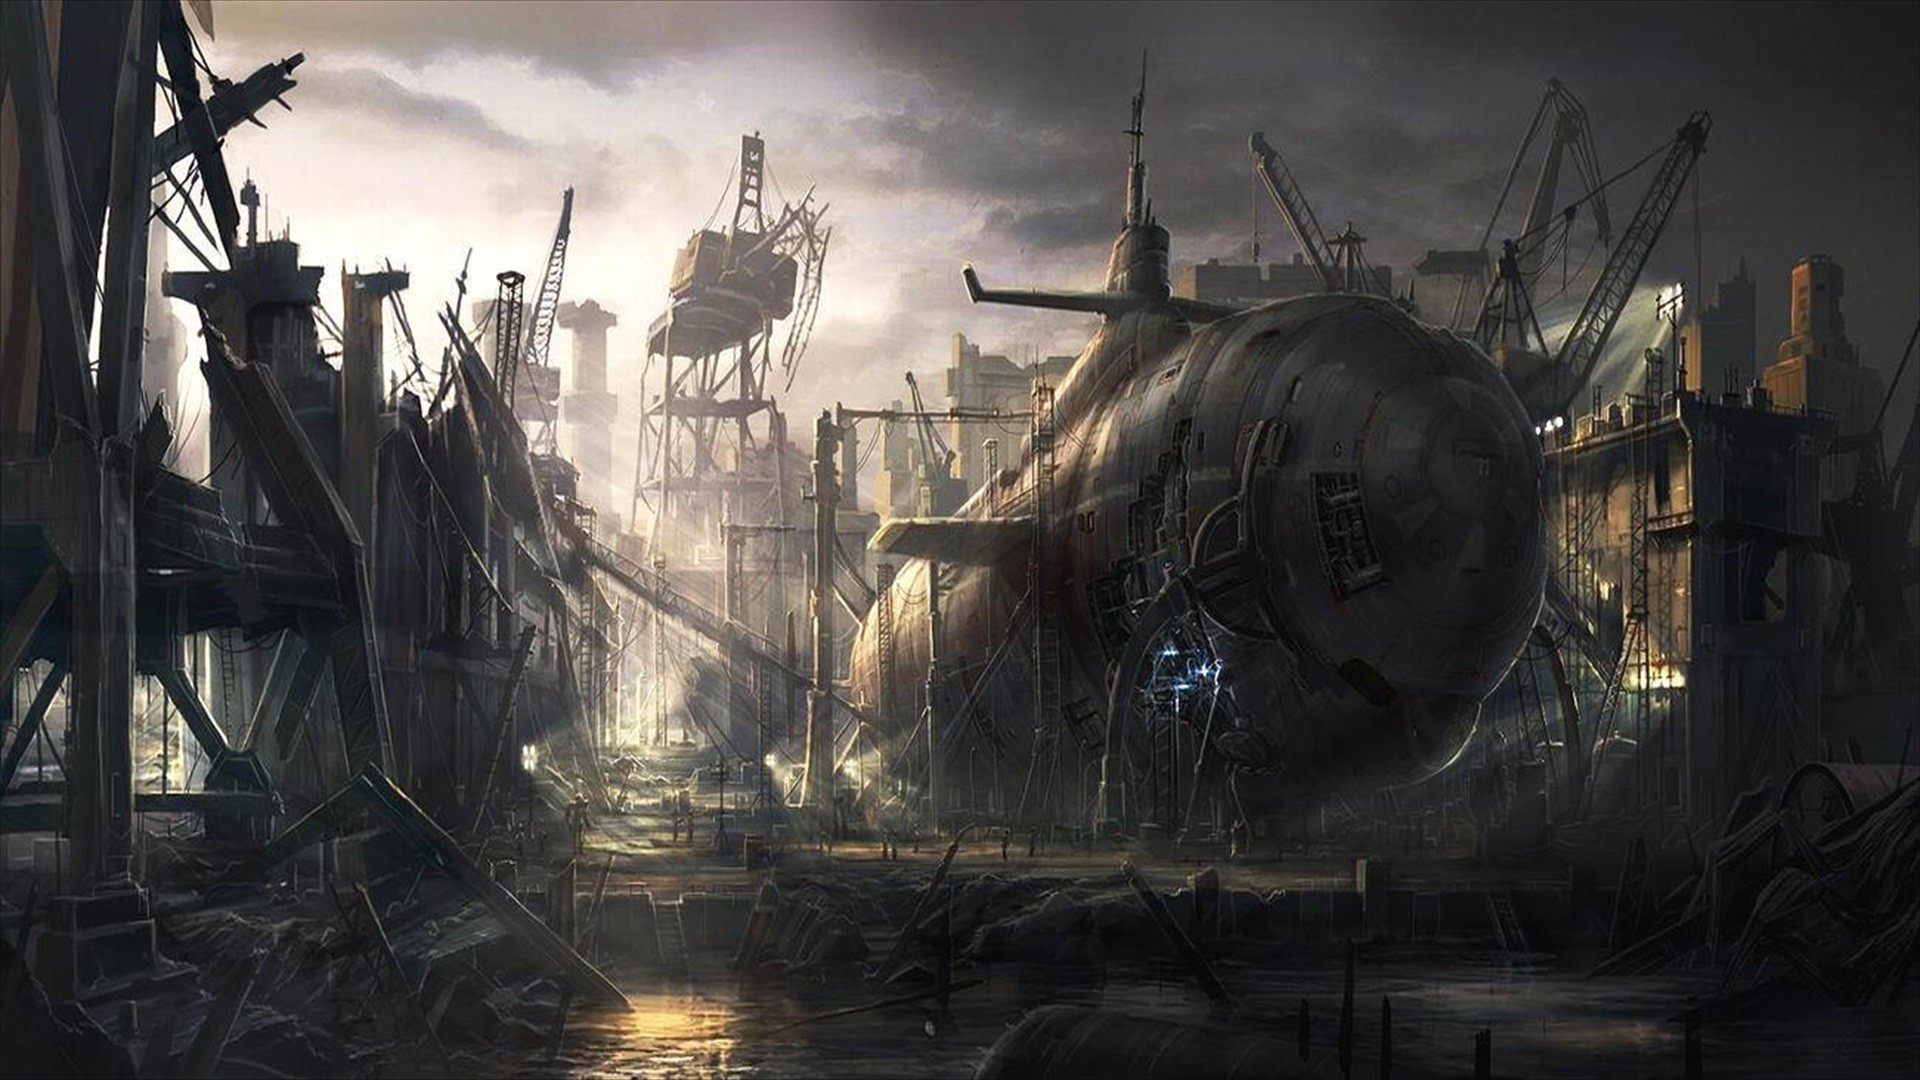 1920x1080 Submarine HD Wallpaper | Background Image |  | ID:142019 -  Wallpaper Abyss